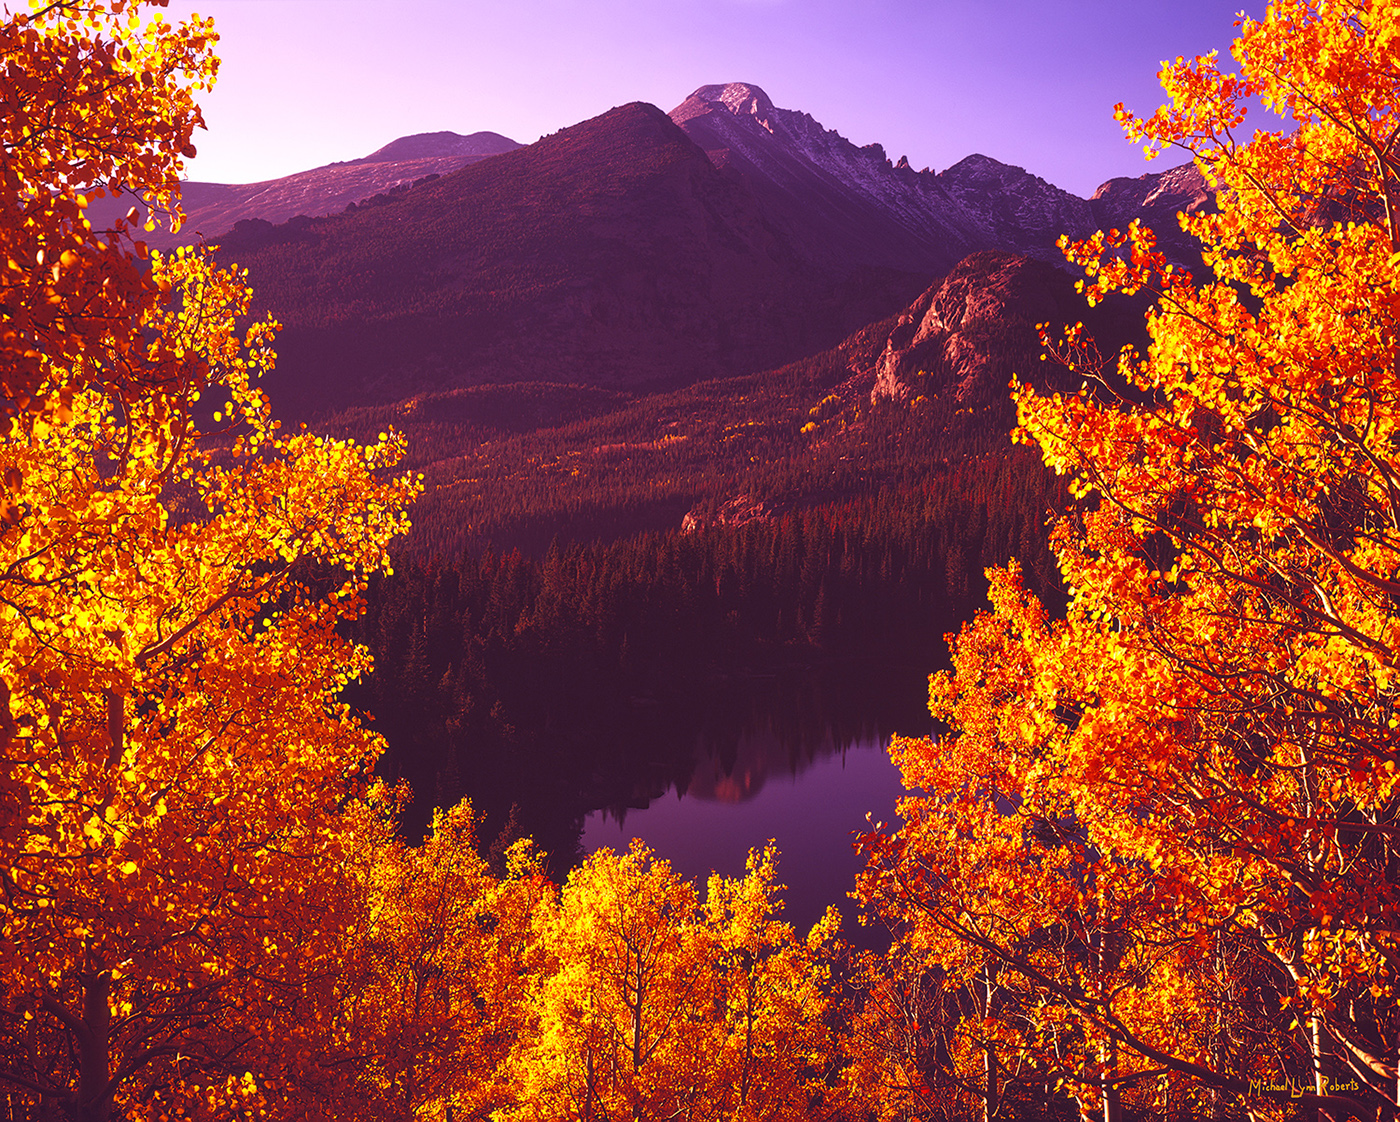 Gorgeous backlit aspens at the height of fall color, the blue waters of Bear Lake below, and majestic 14,259' Longs Peak in the...